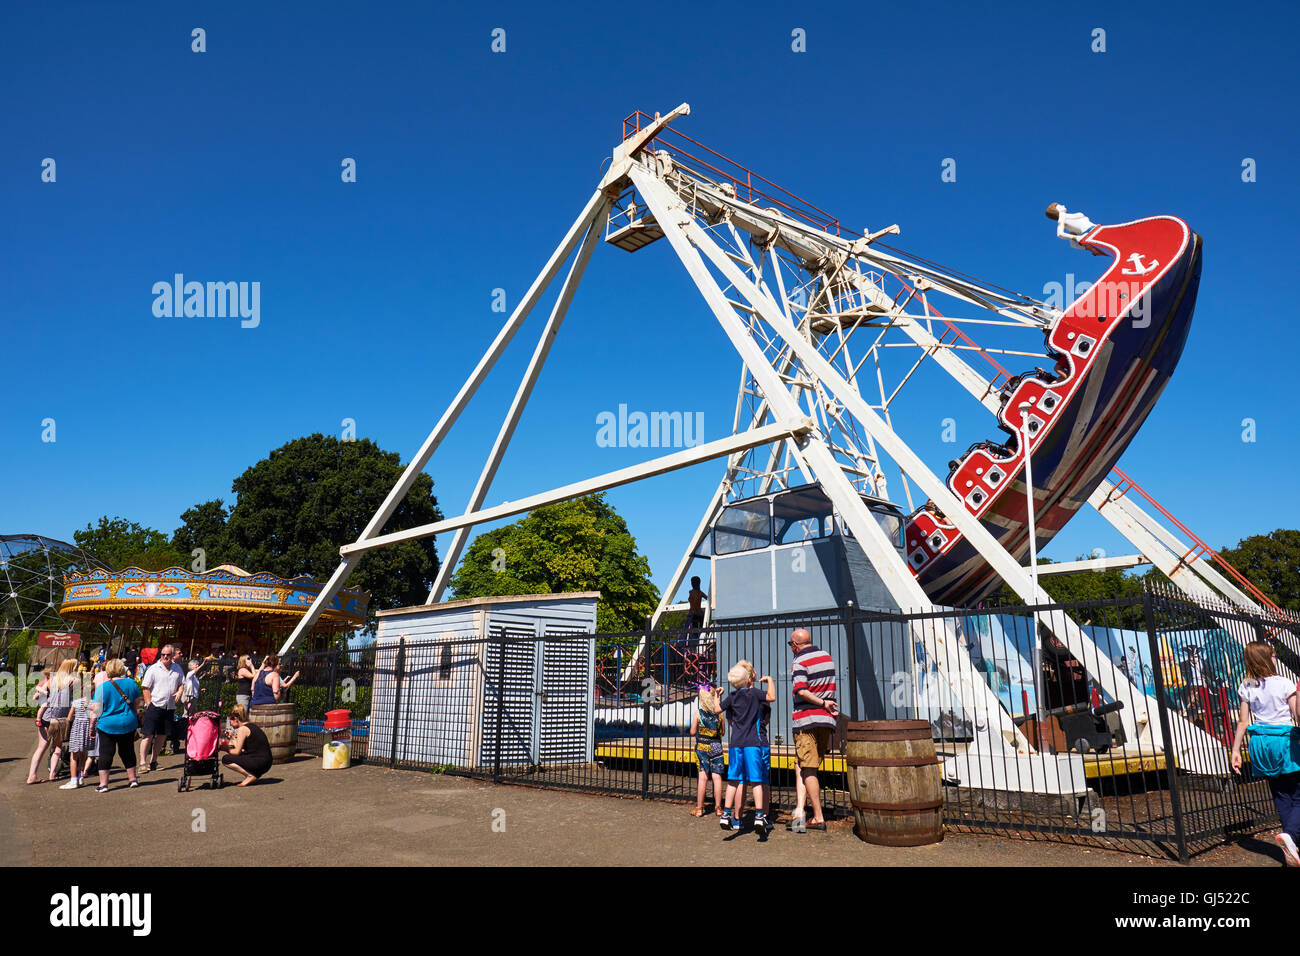 Pirate Ship Ride At Wicksteed Park The Second Oldest Theme Park In The UK Kettering Northamptonshire Stock Photo